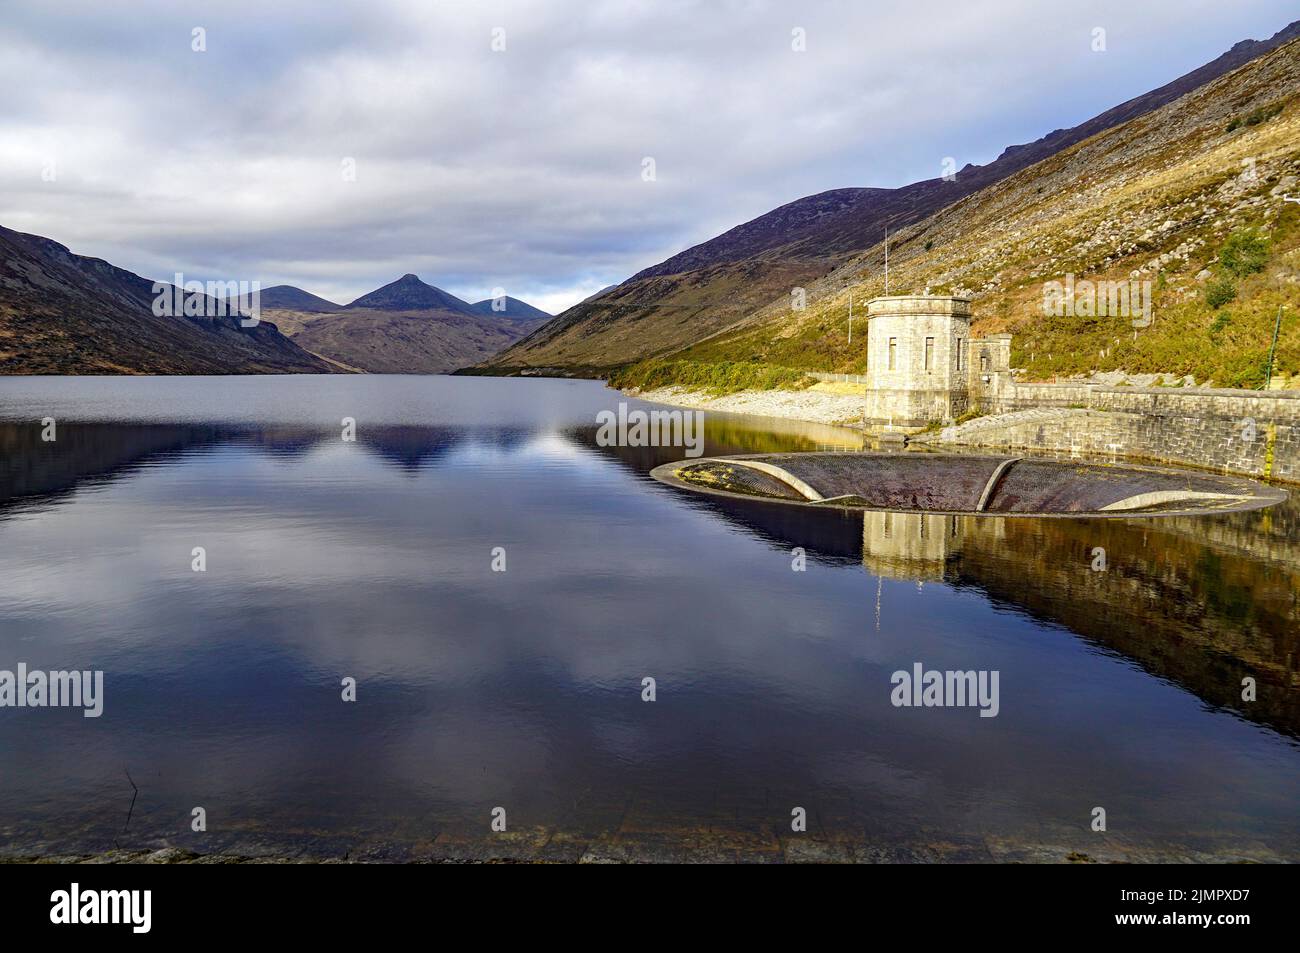 Silent Valley Reservoir in Mourne Mountains, County Down, Irlanda del Nord Foto Stock